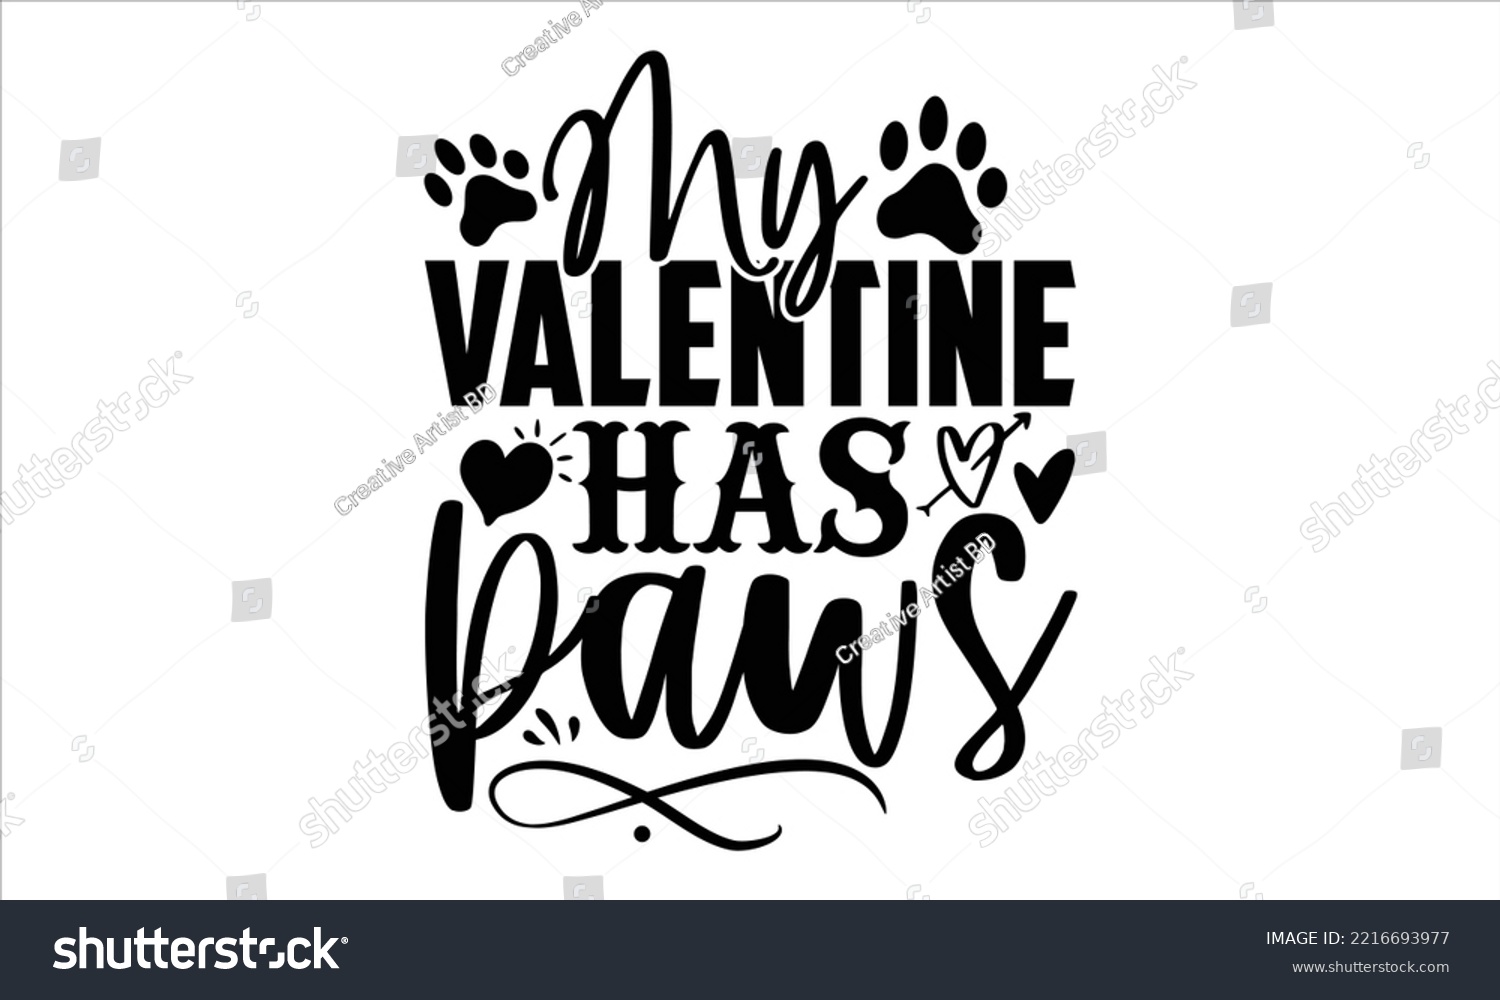 SVG of My Valentine Has Paws  - Happy Valentine's Day T shirt Design, Hand drawn vintage illustration with hand-lettering and decoration elements, Cut Files for Cricut Svg, Digital Download svg